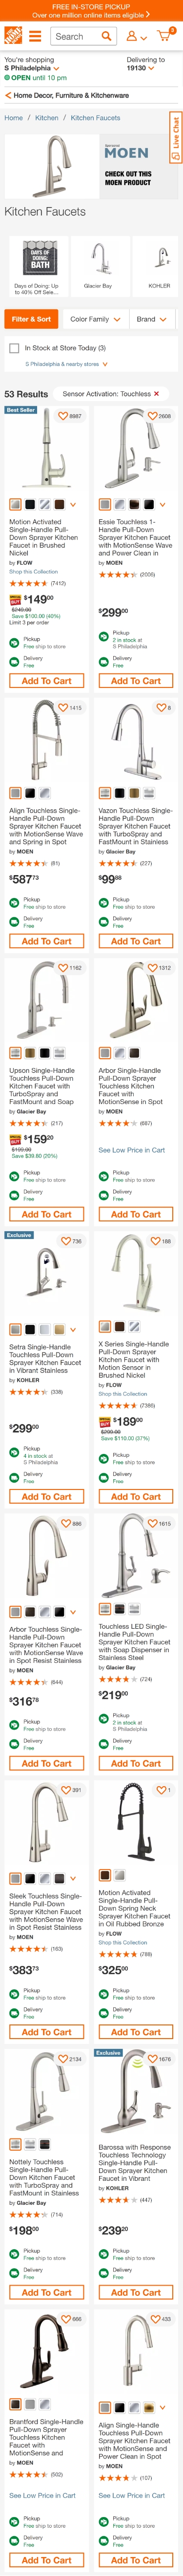 homedepot category page mobile